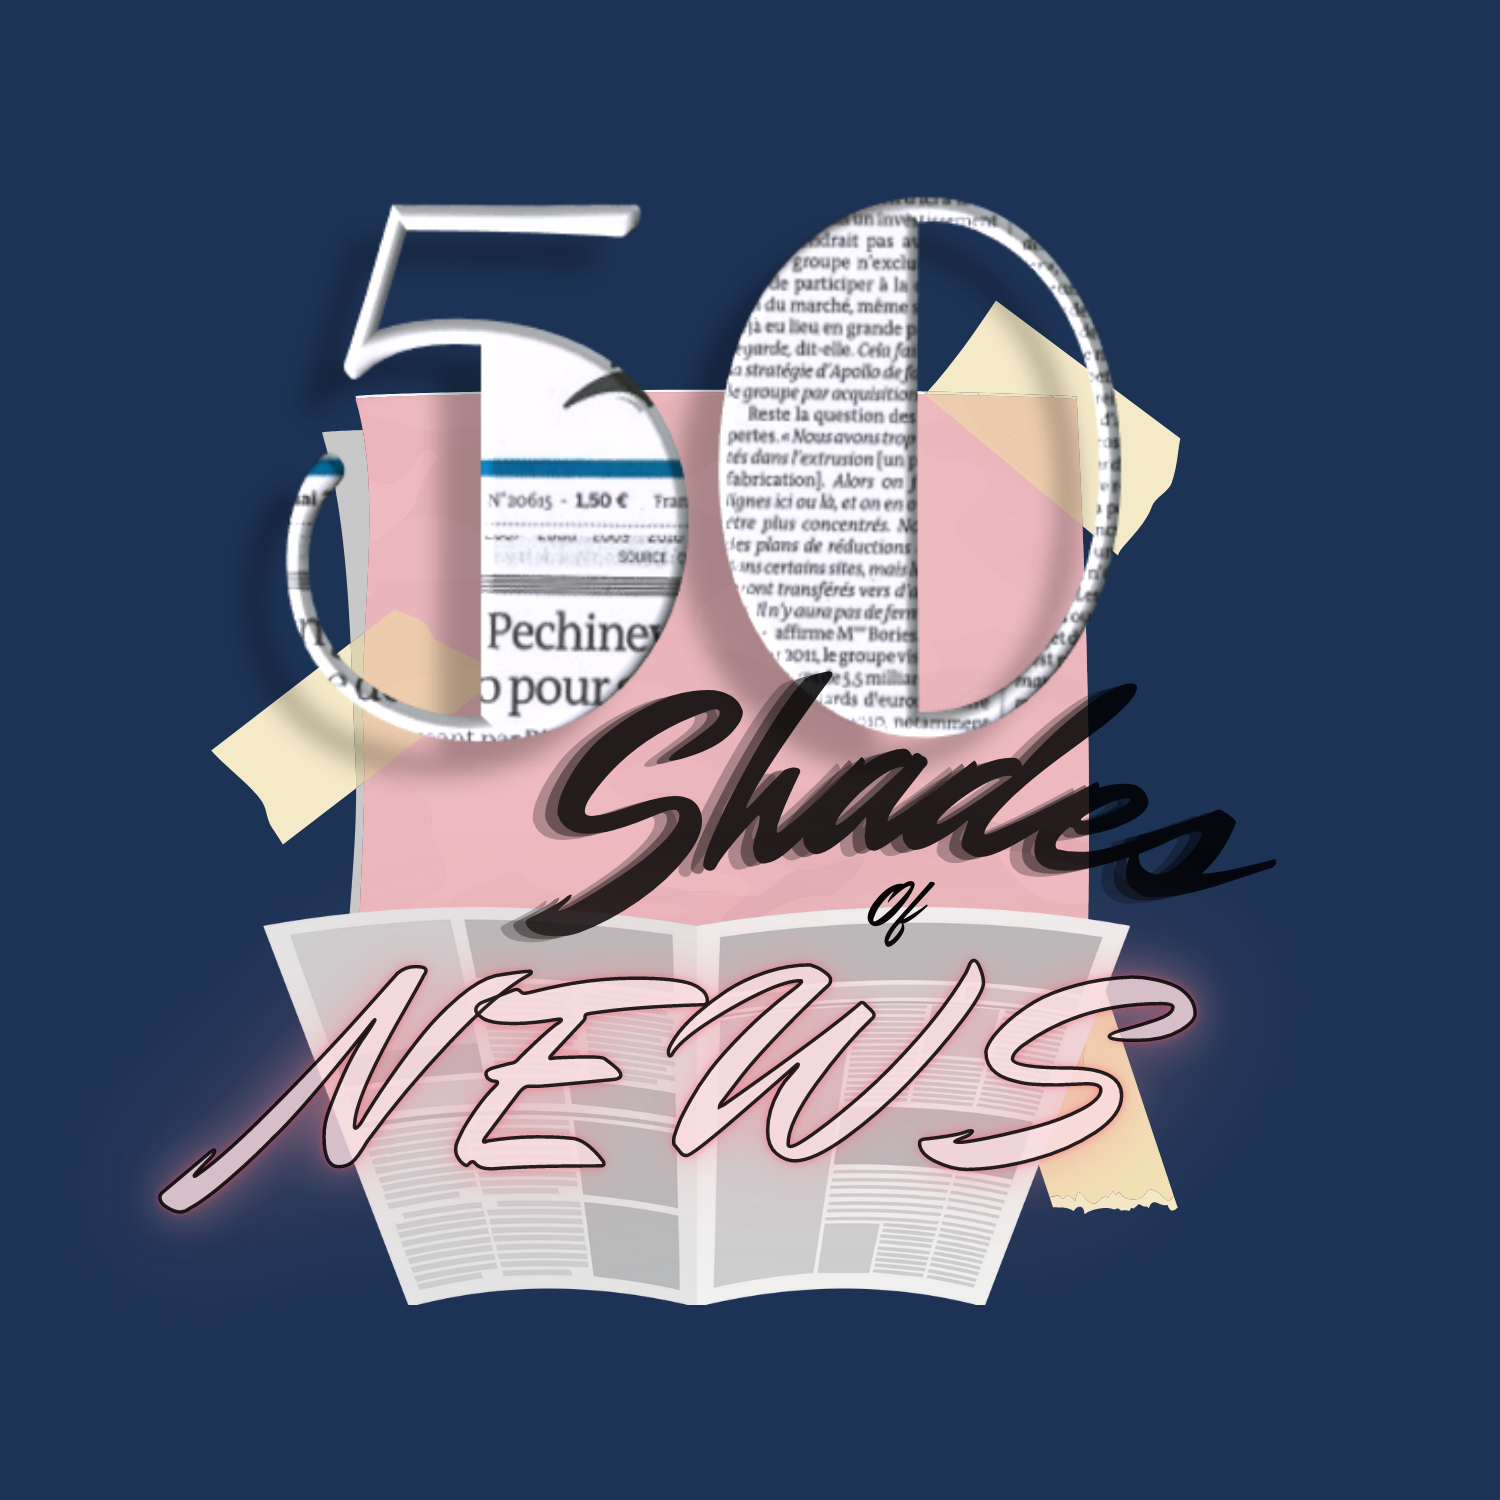 Ep. 0: Fifty Shades of News 